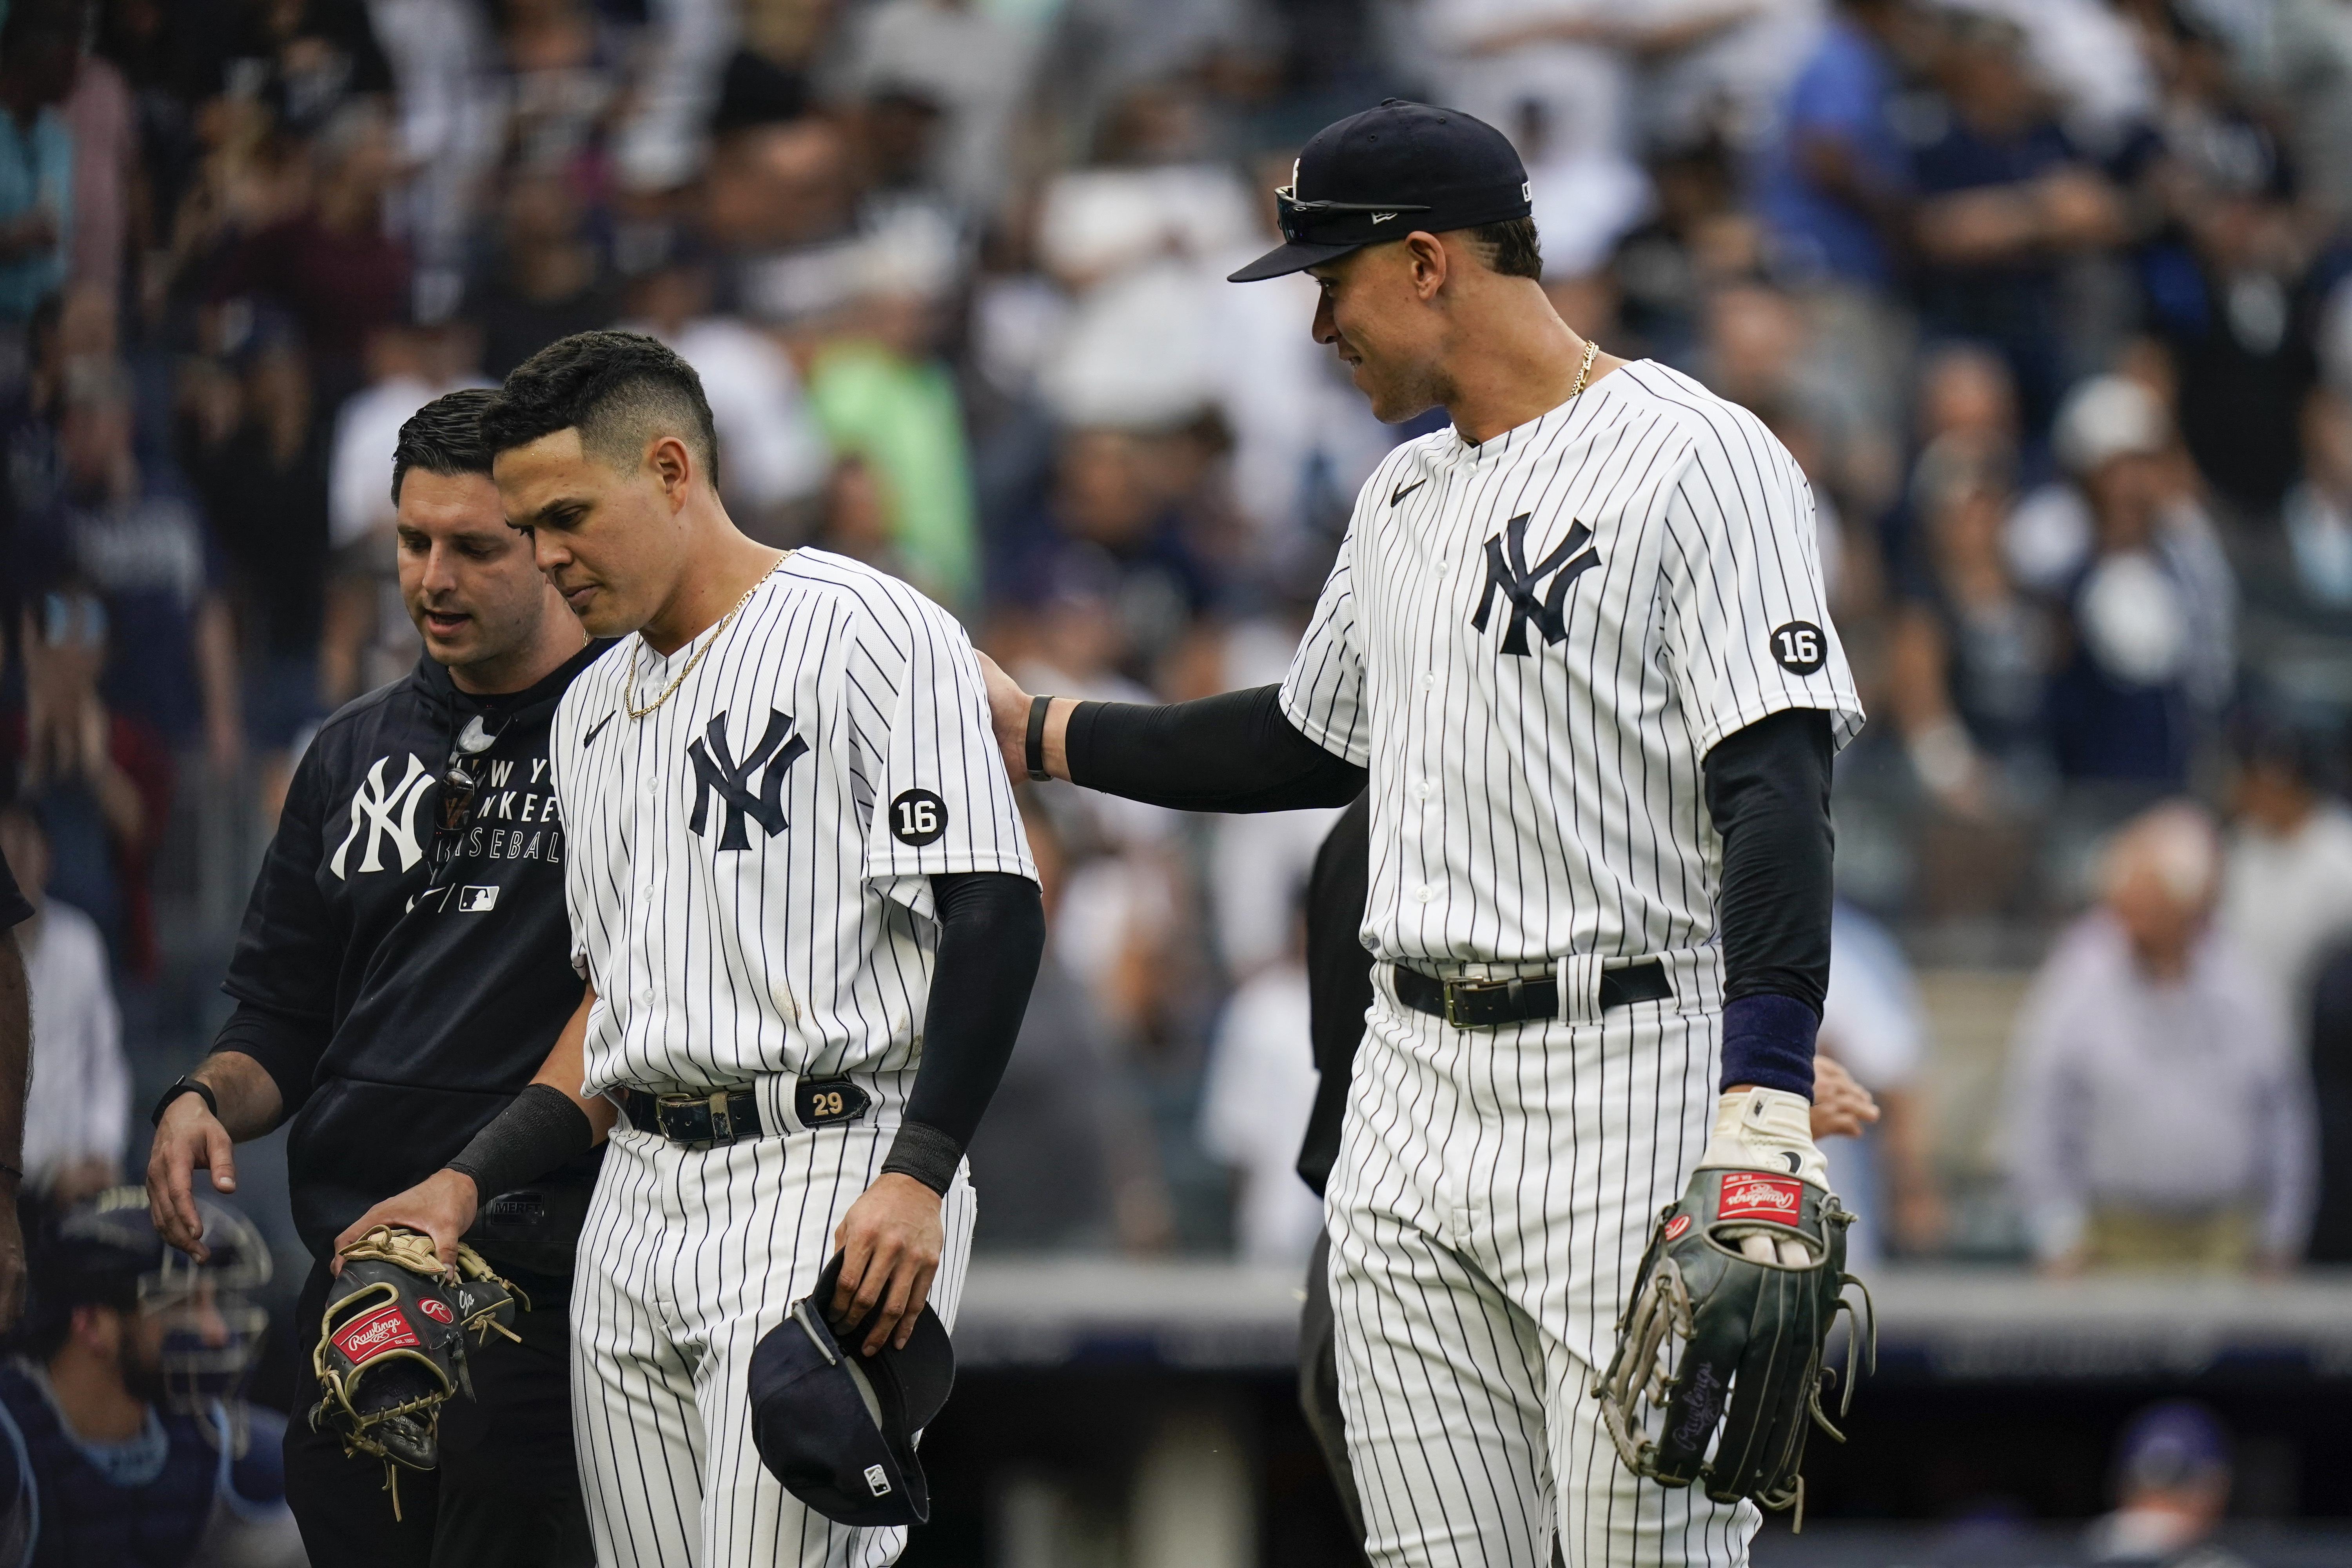 Aaron Judge delivers in 9th, Yankees clinch playoff spot in final